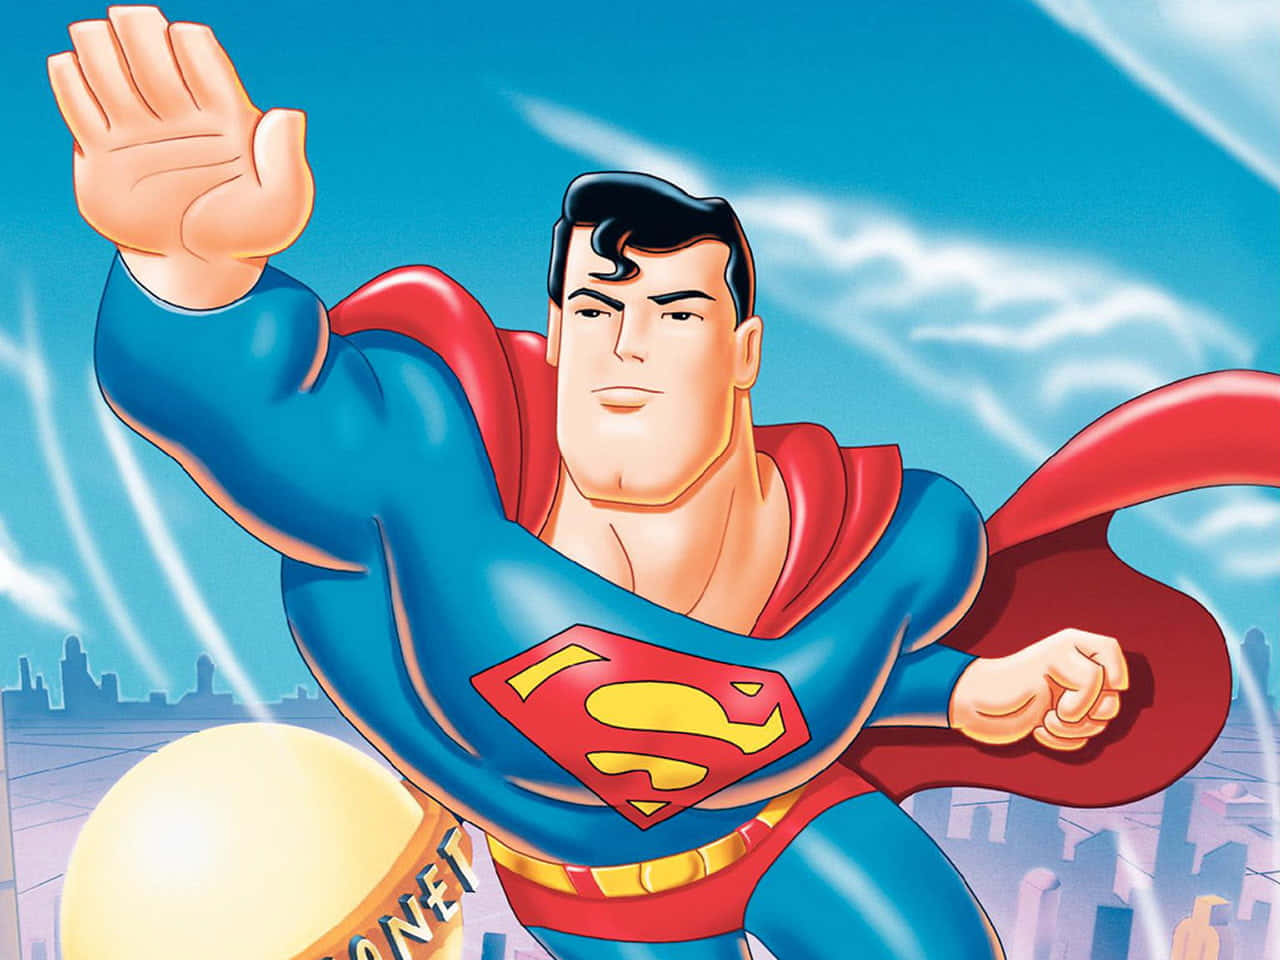 Superman flying over Metropolis in Superman: The Animated Series Wallpaper